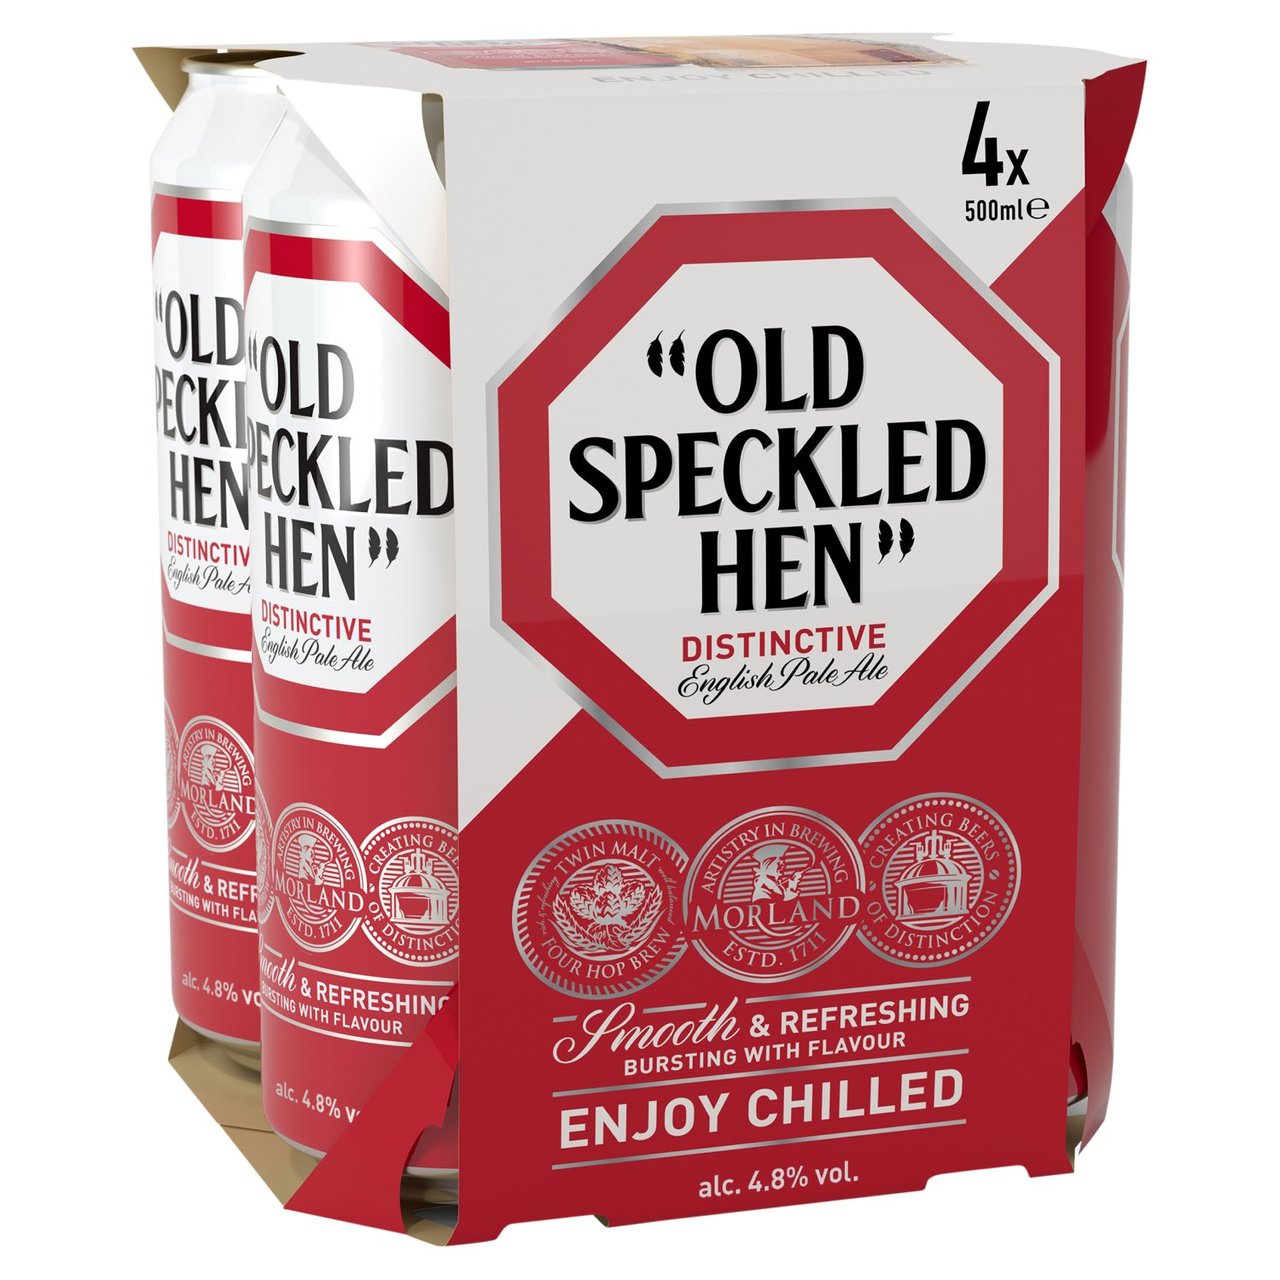 Old Speckled Hen 4 x 500ml 4.8%